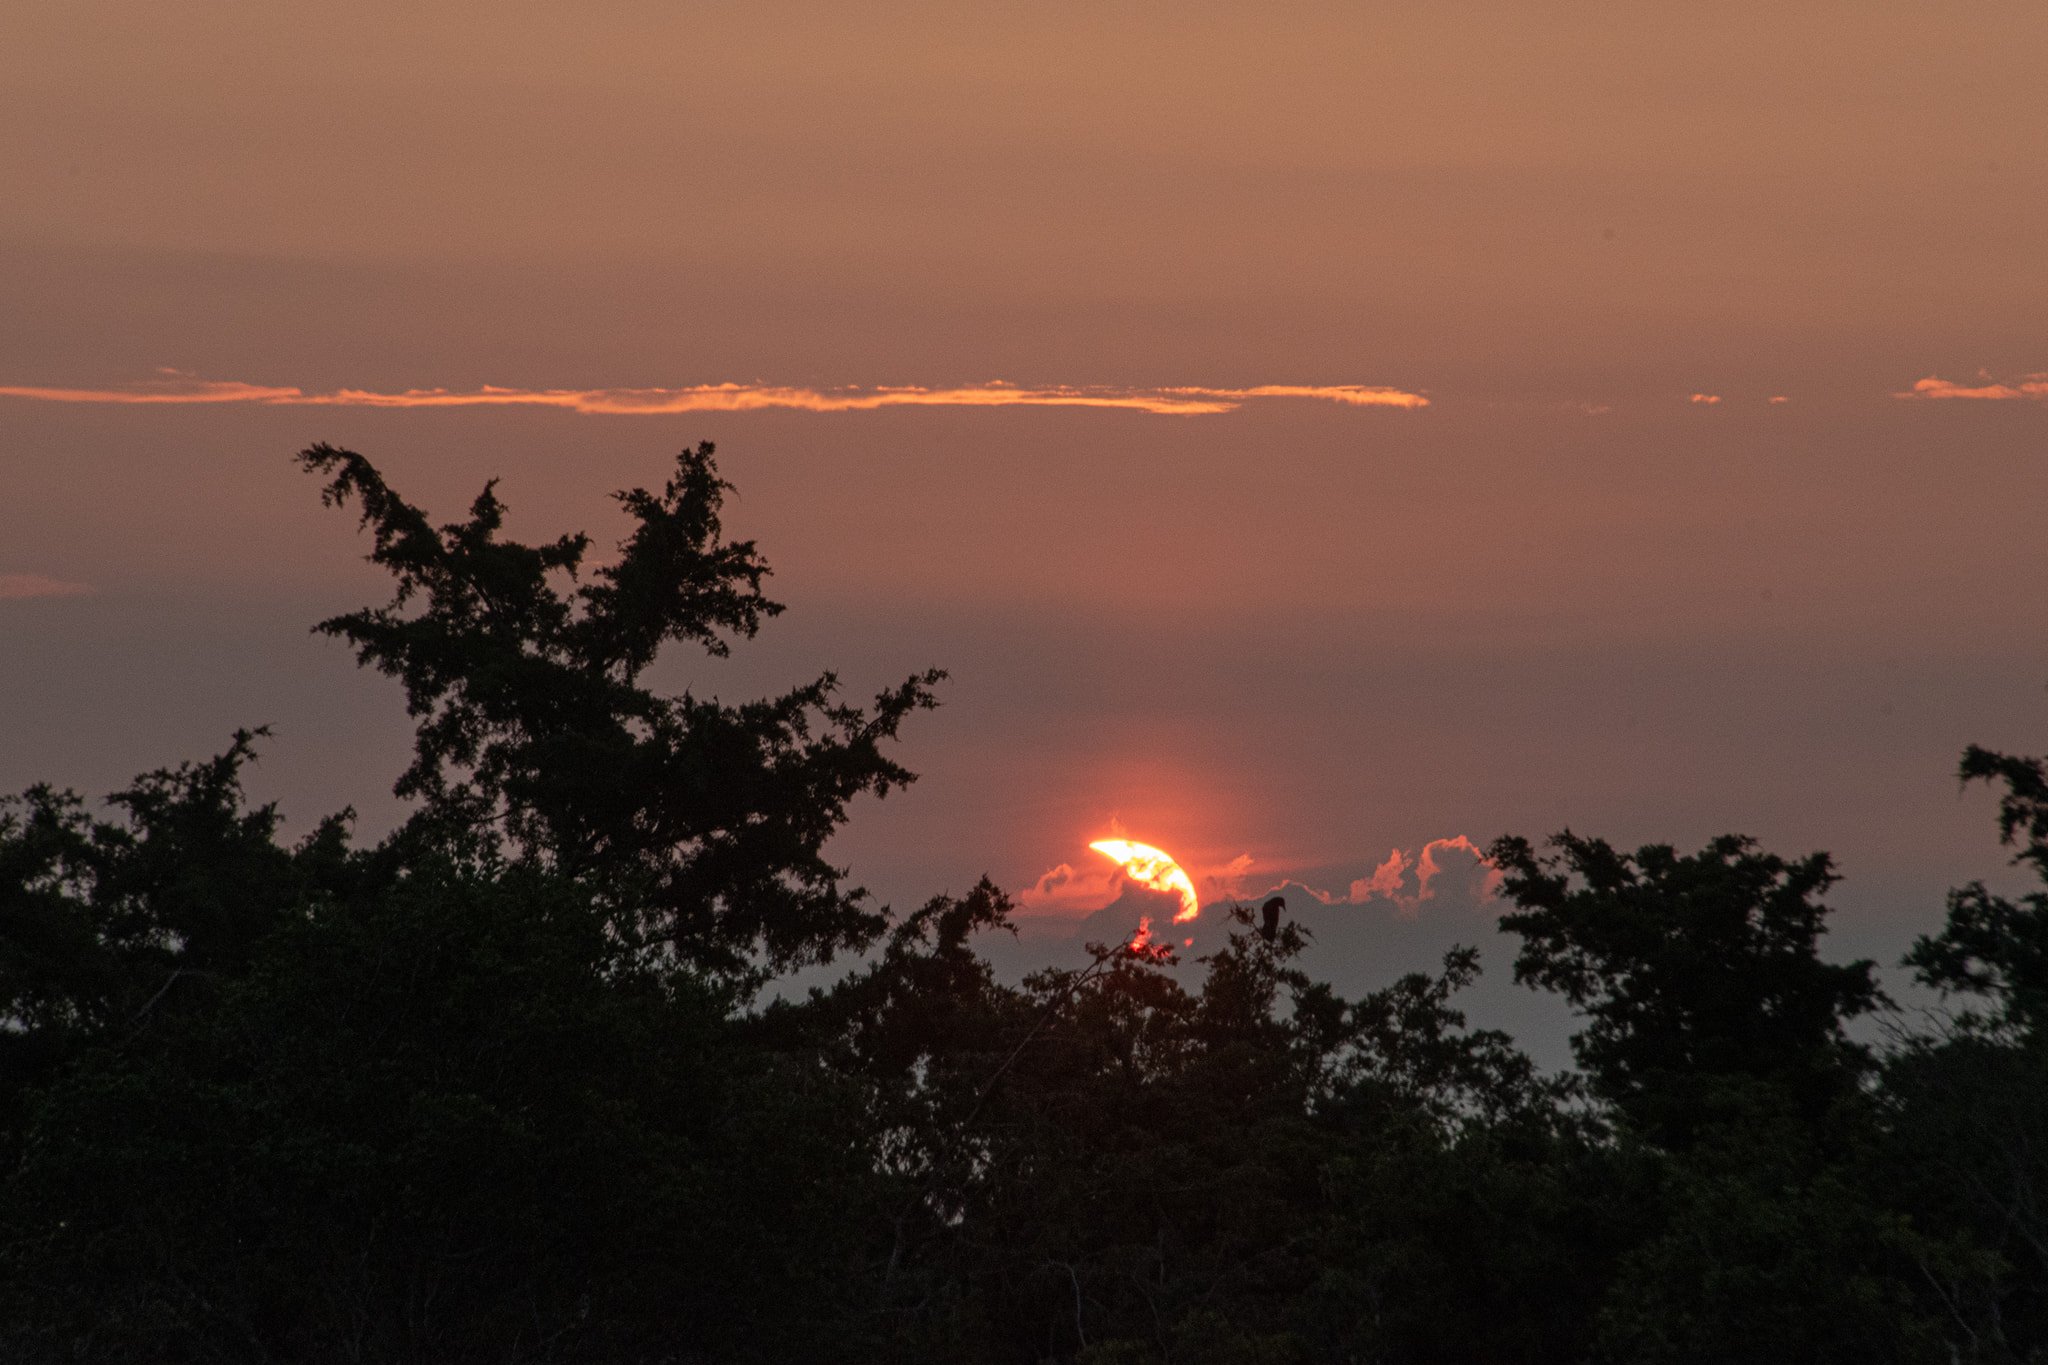 A partially eclipsed sun is visible behind clouds as it rises in the morning.